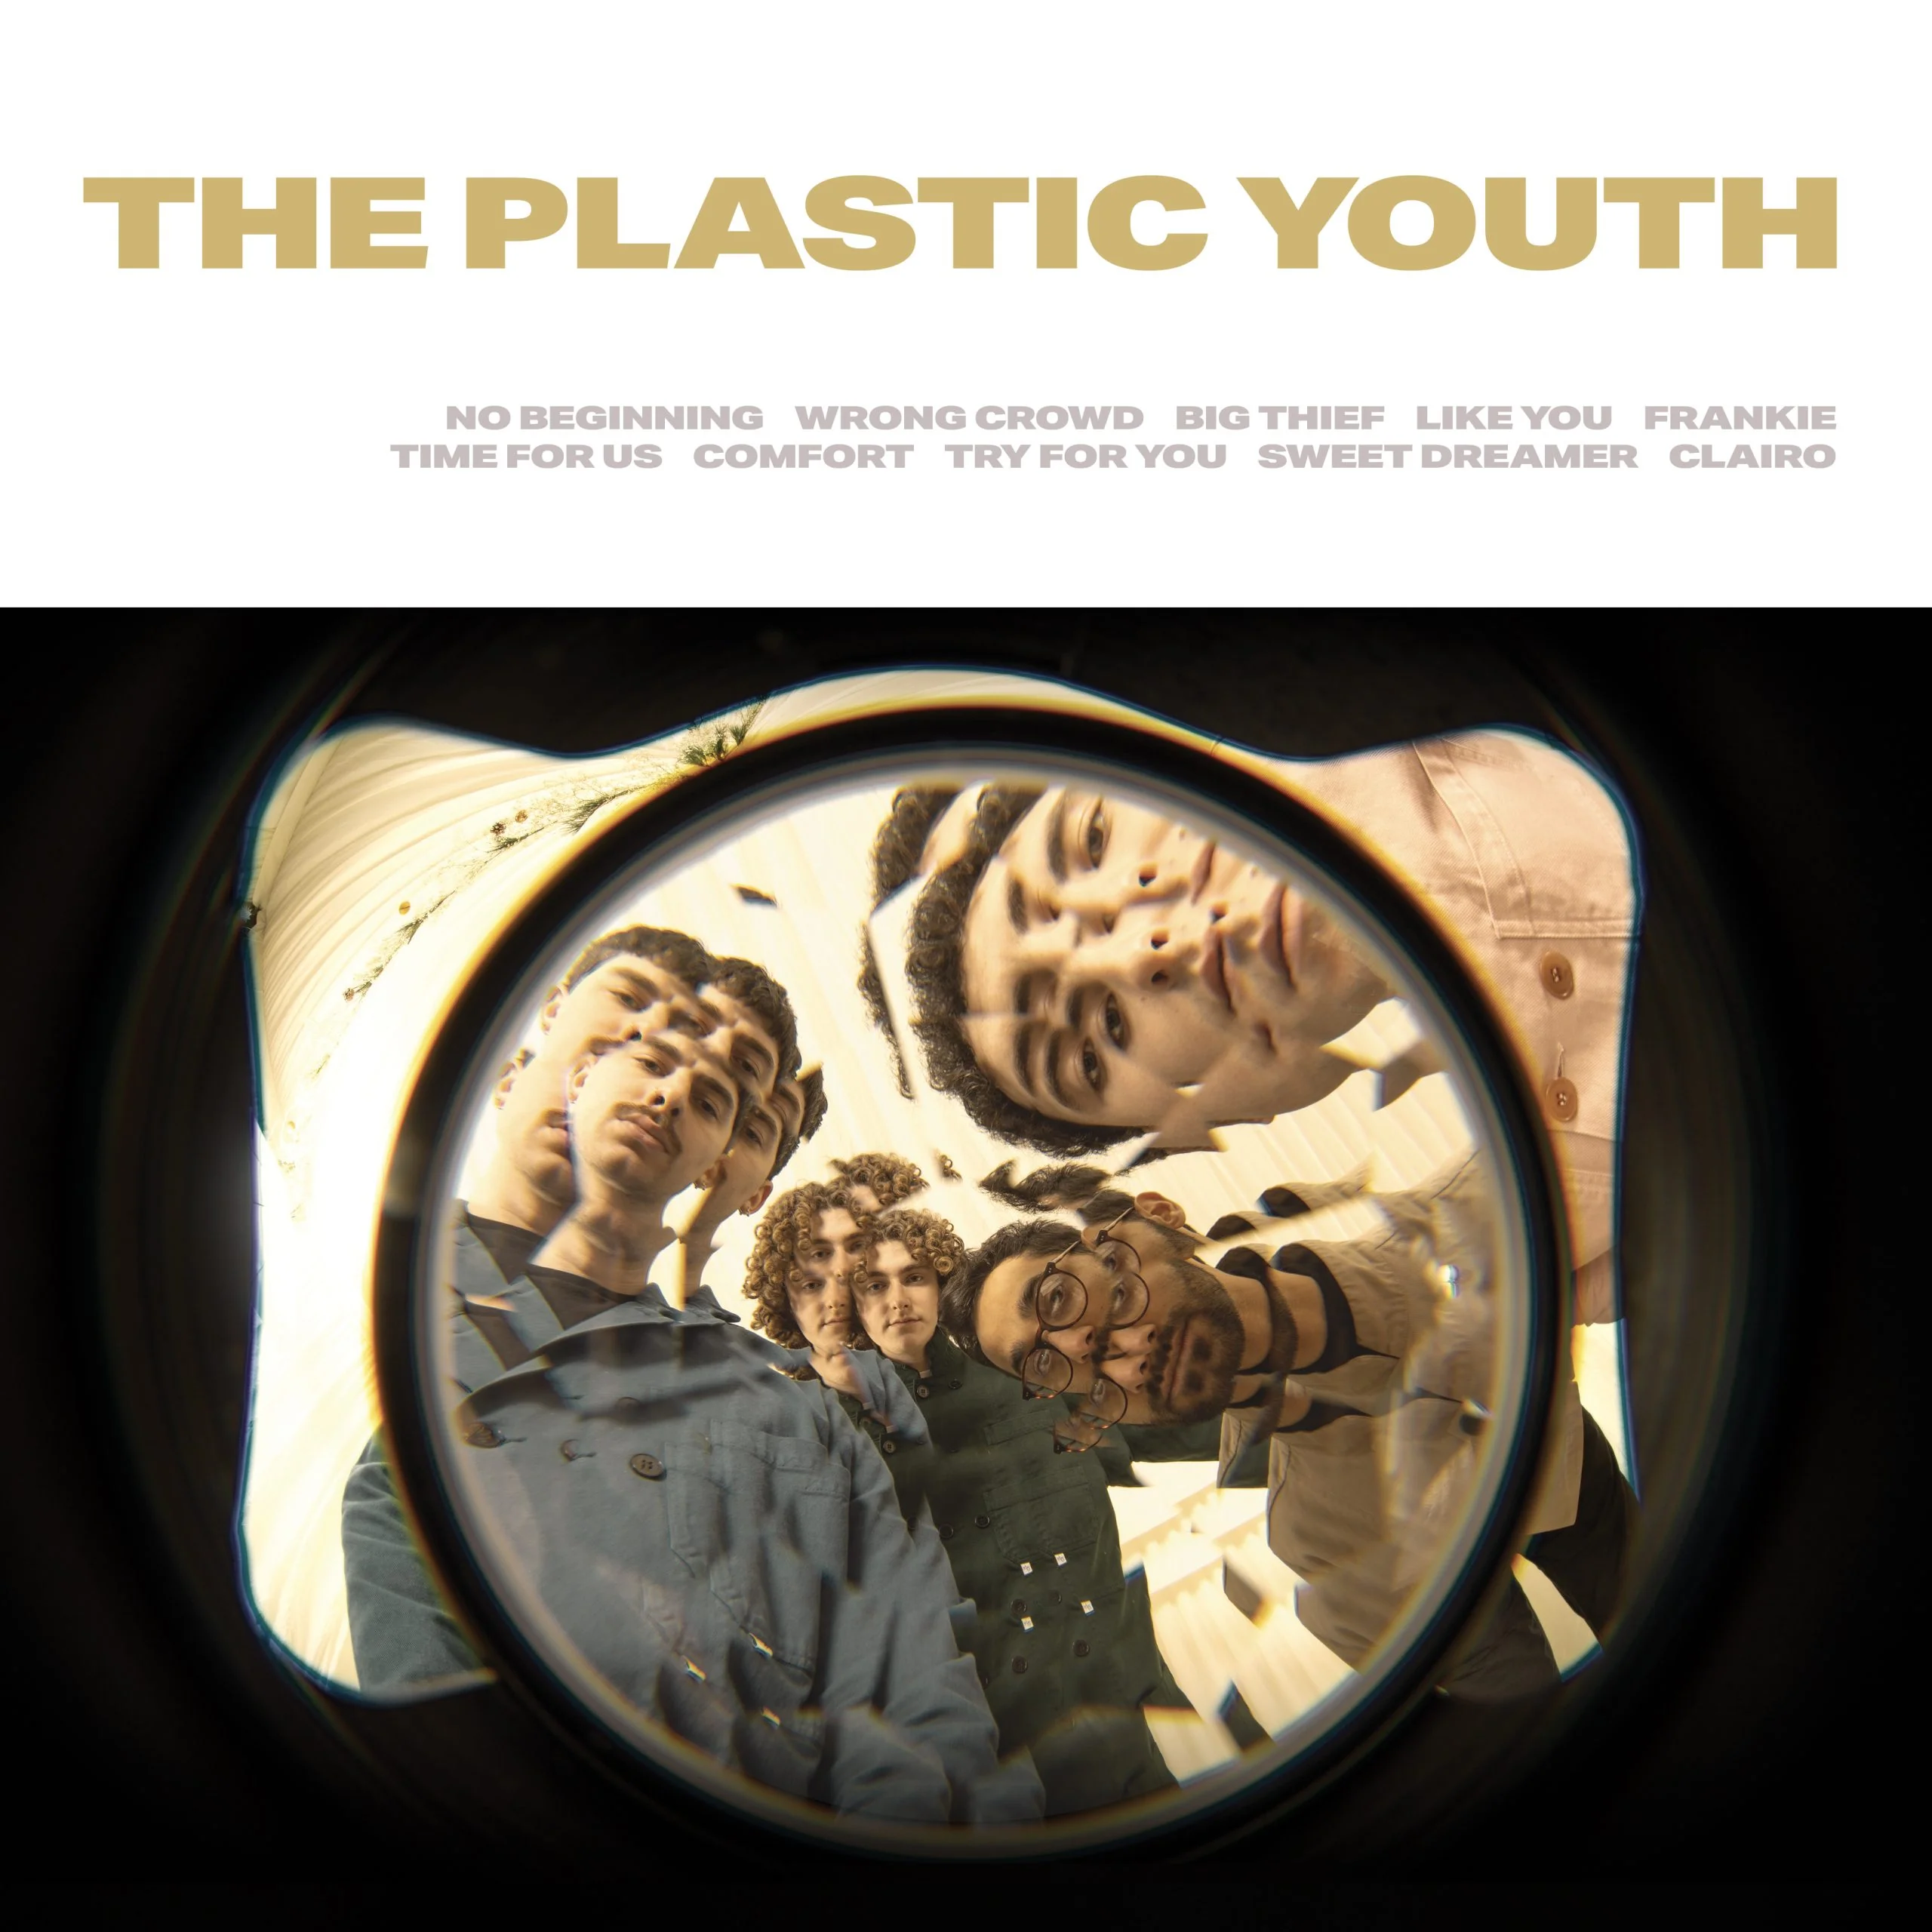 Record Of The Week! The Plastic Youth – The Plastic Youth